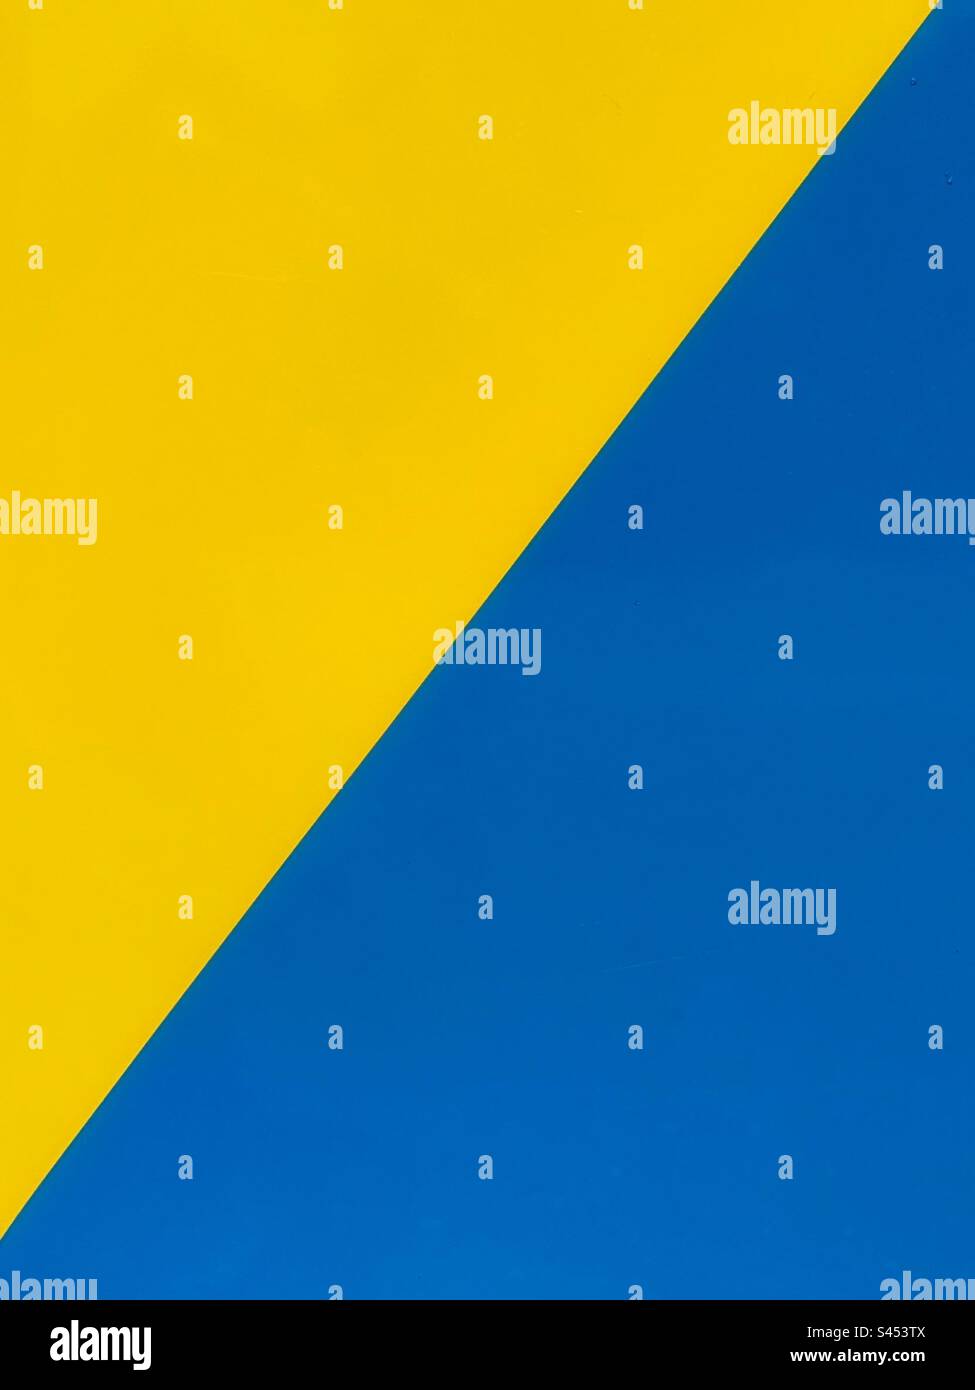 Shiny metal panel painted in yellow and blue triangles. Backgrounds. No people. Stock Photo